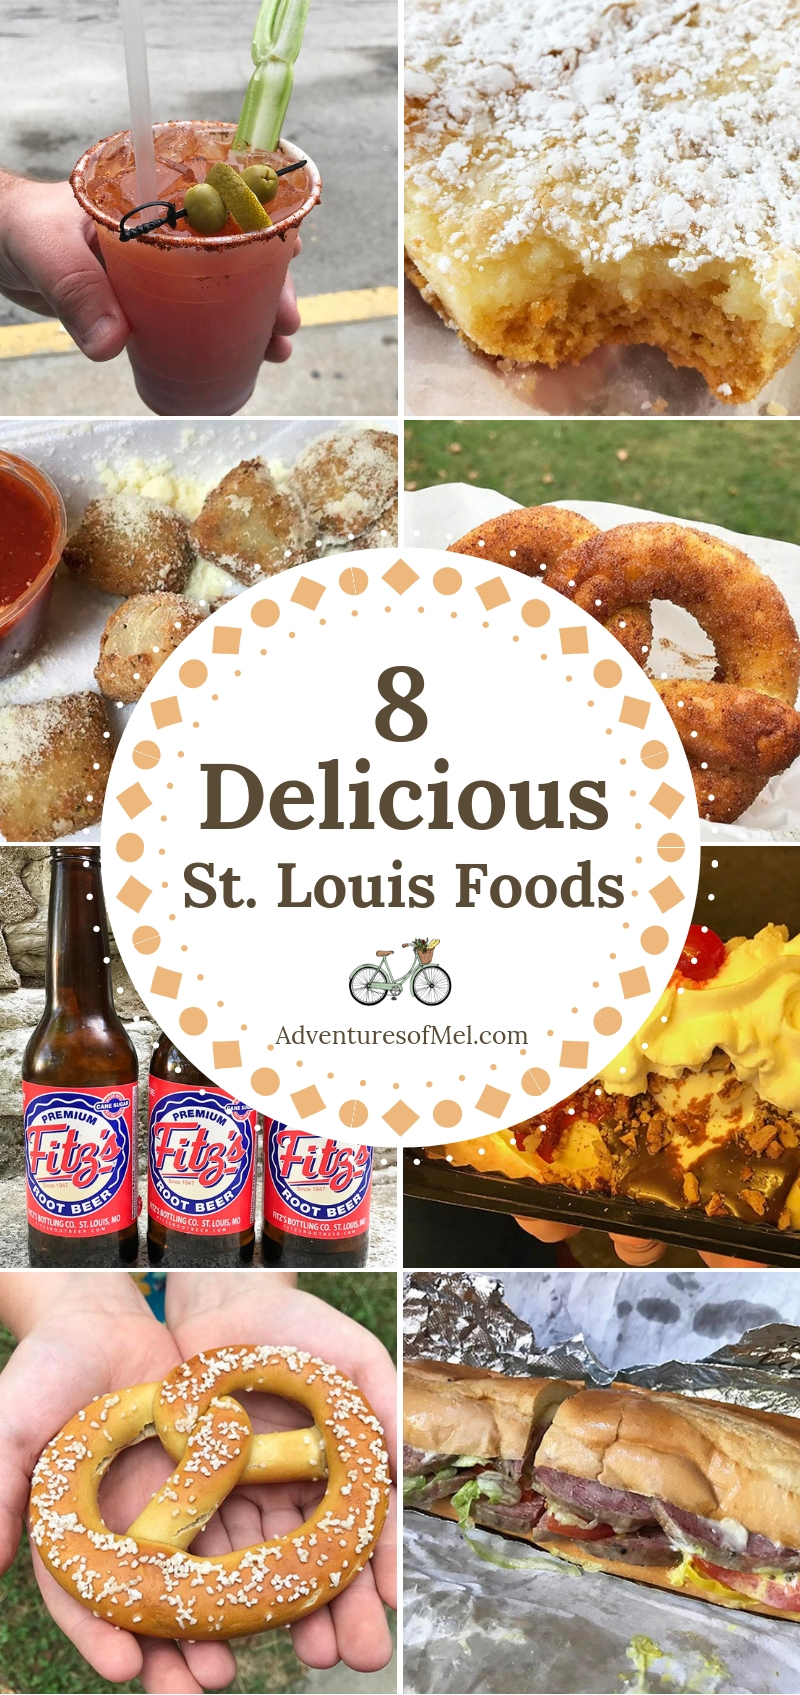 delicious must try St. Louis foods and best restaurants in St. Louis